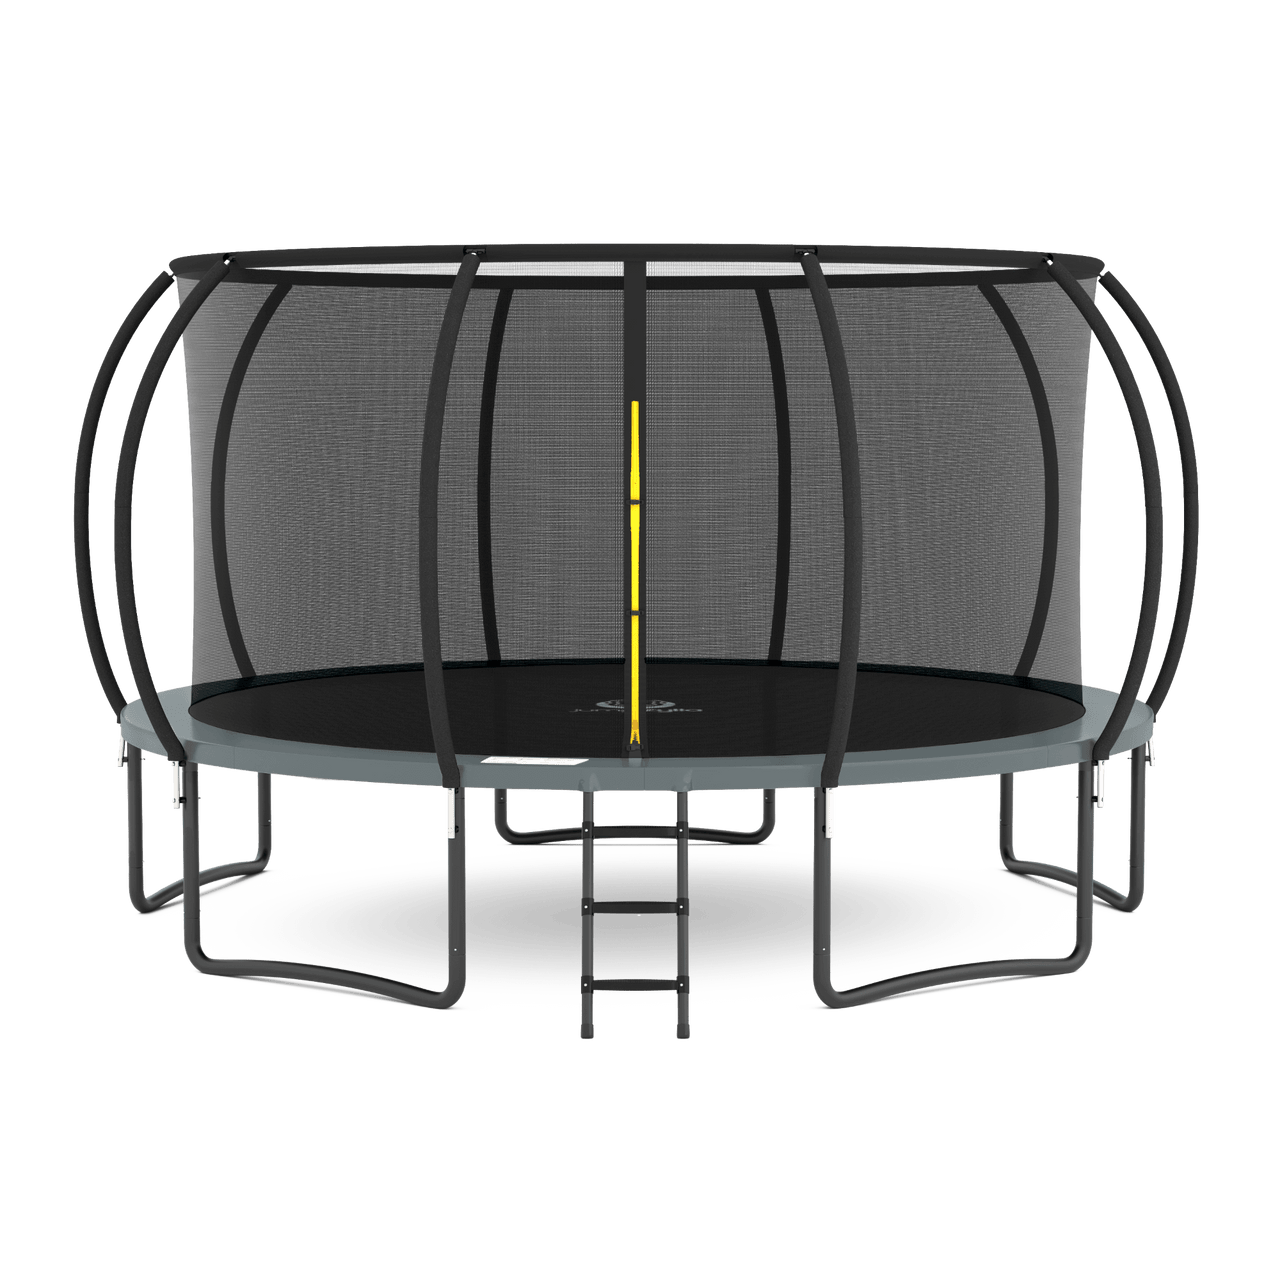 Jumpzylla 15FT Trampoline with Enclosure & Double Color Pad Cover